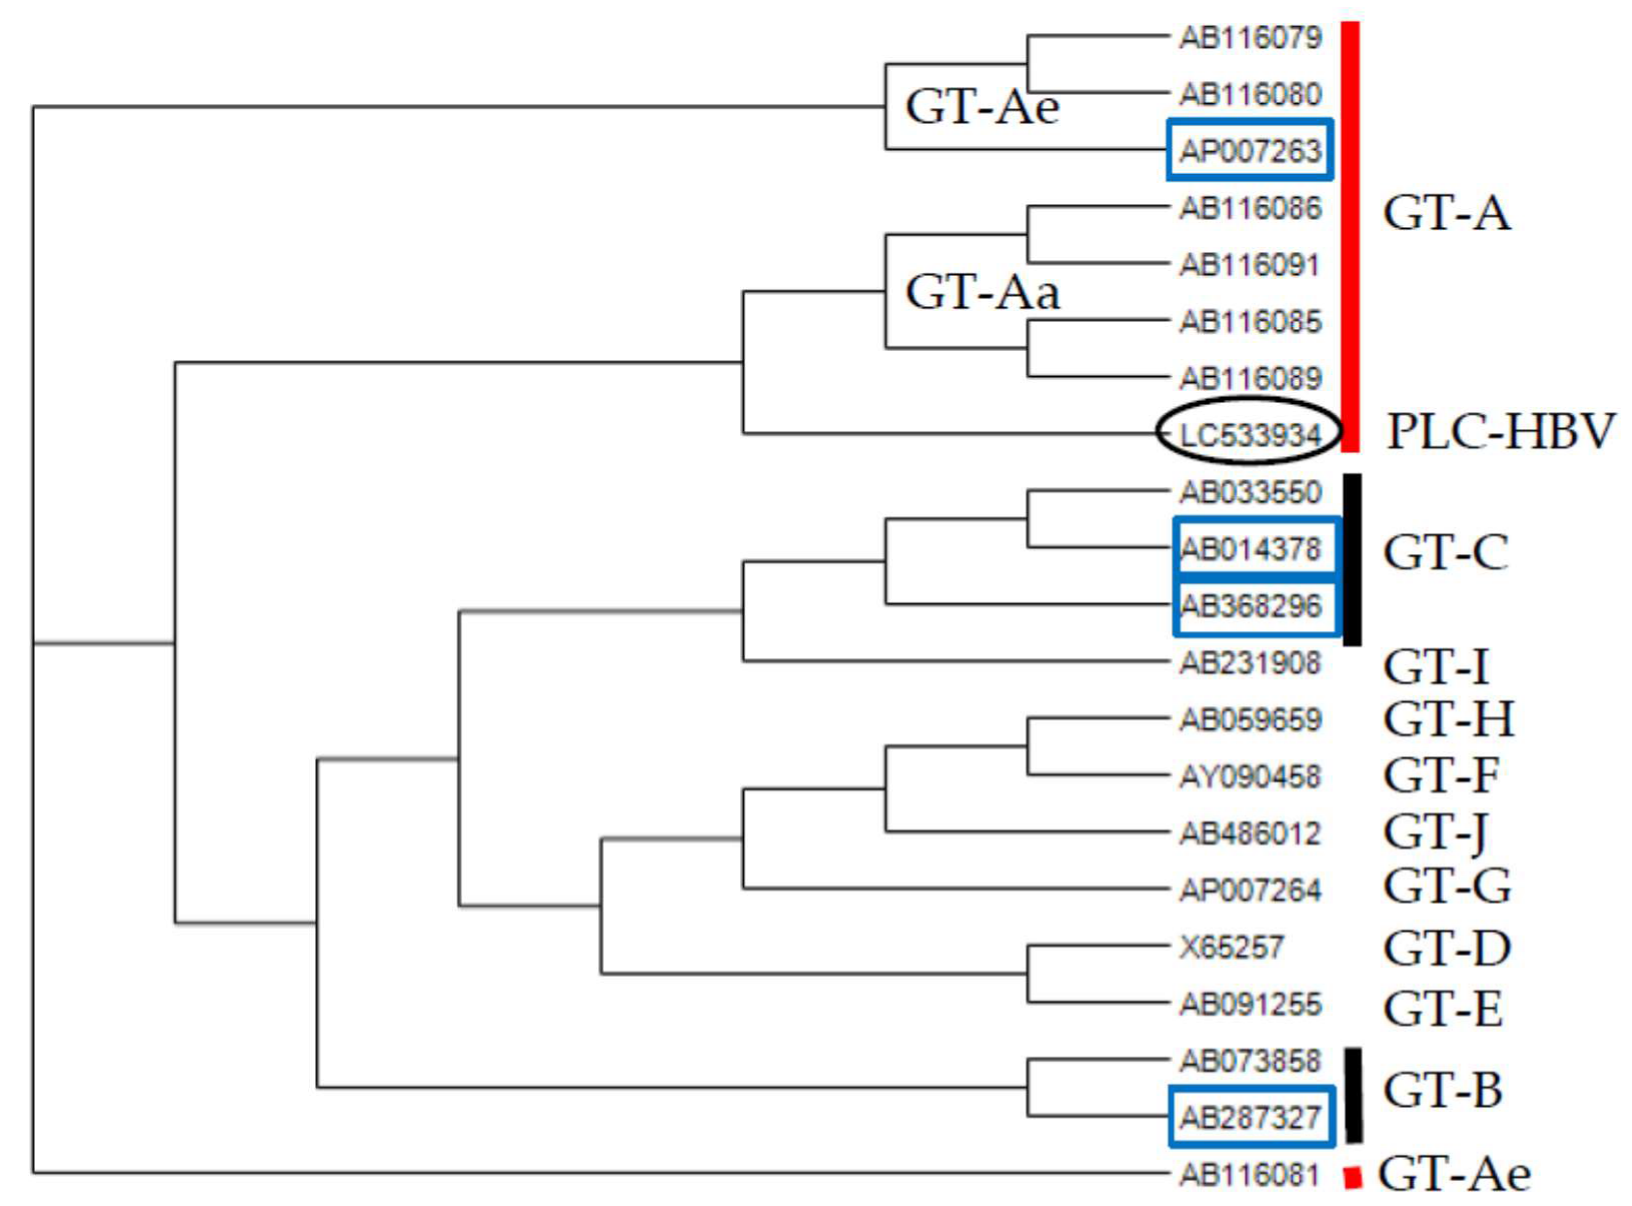 Genes Free Full Text Analysis Of Hbv Genomes Integrated Into The Genomes Of Human Hepatoma Plc Prf 5 Cells By Hbv Sequence Capture Based Next Generation Sequencing Html